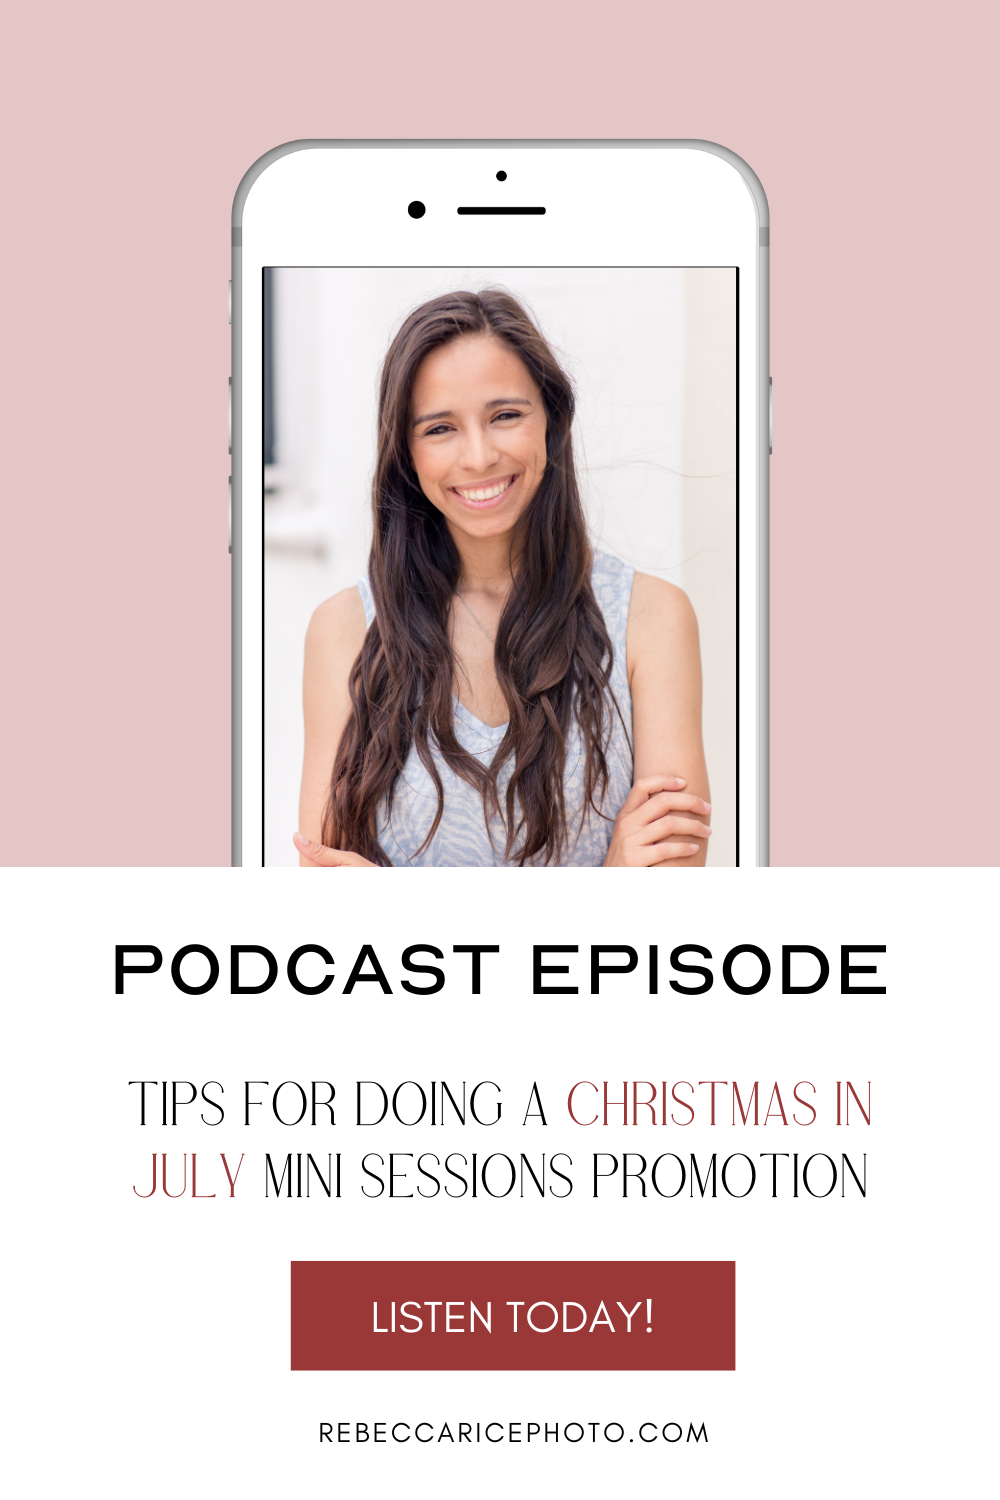 Tips for doing a Christmas in July Mini Sessions Promotion!  Click to listen NOW!
-rebeccaricephoto.com